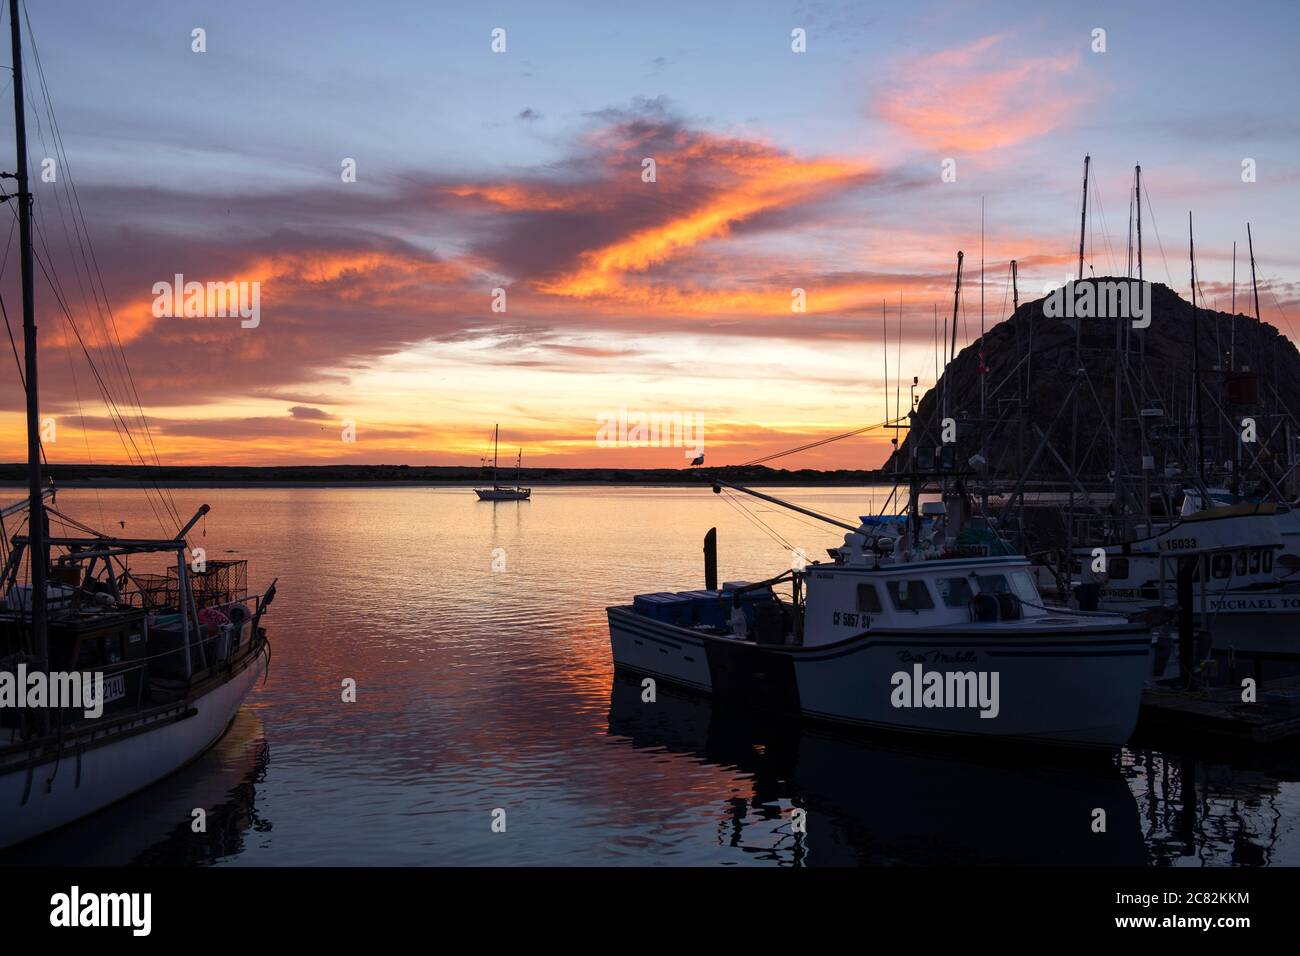 Fiery sunset reflected in Morro Bay among the fishing boats on a calm evening Stock Photo